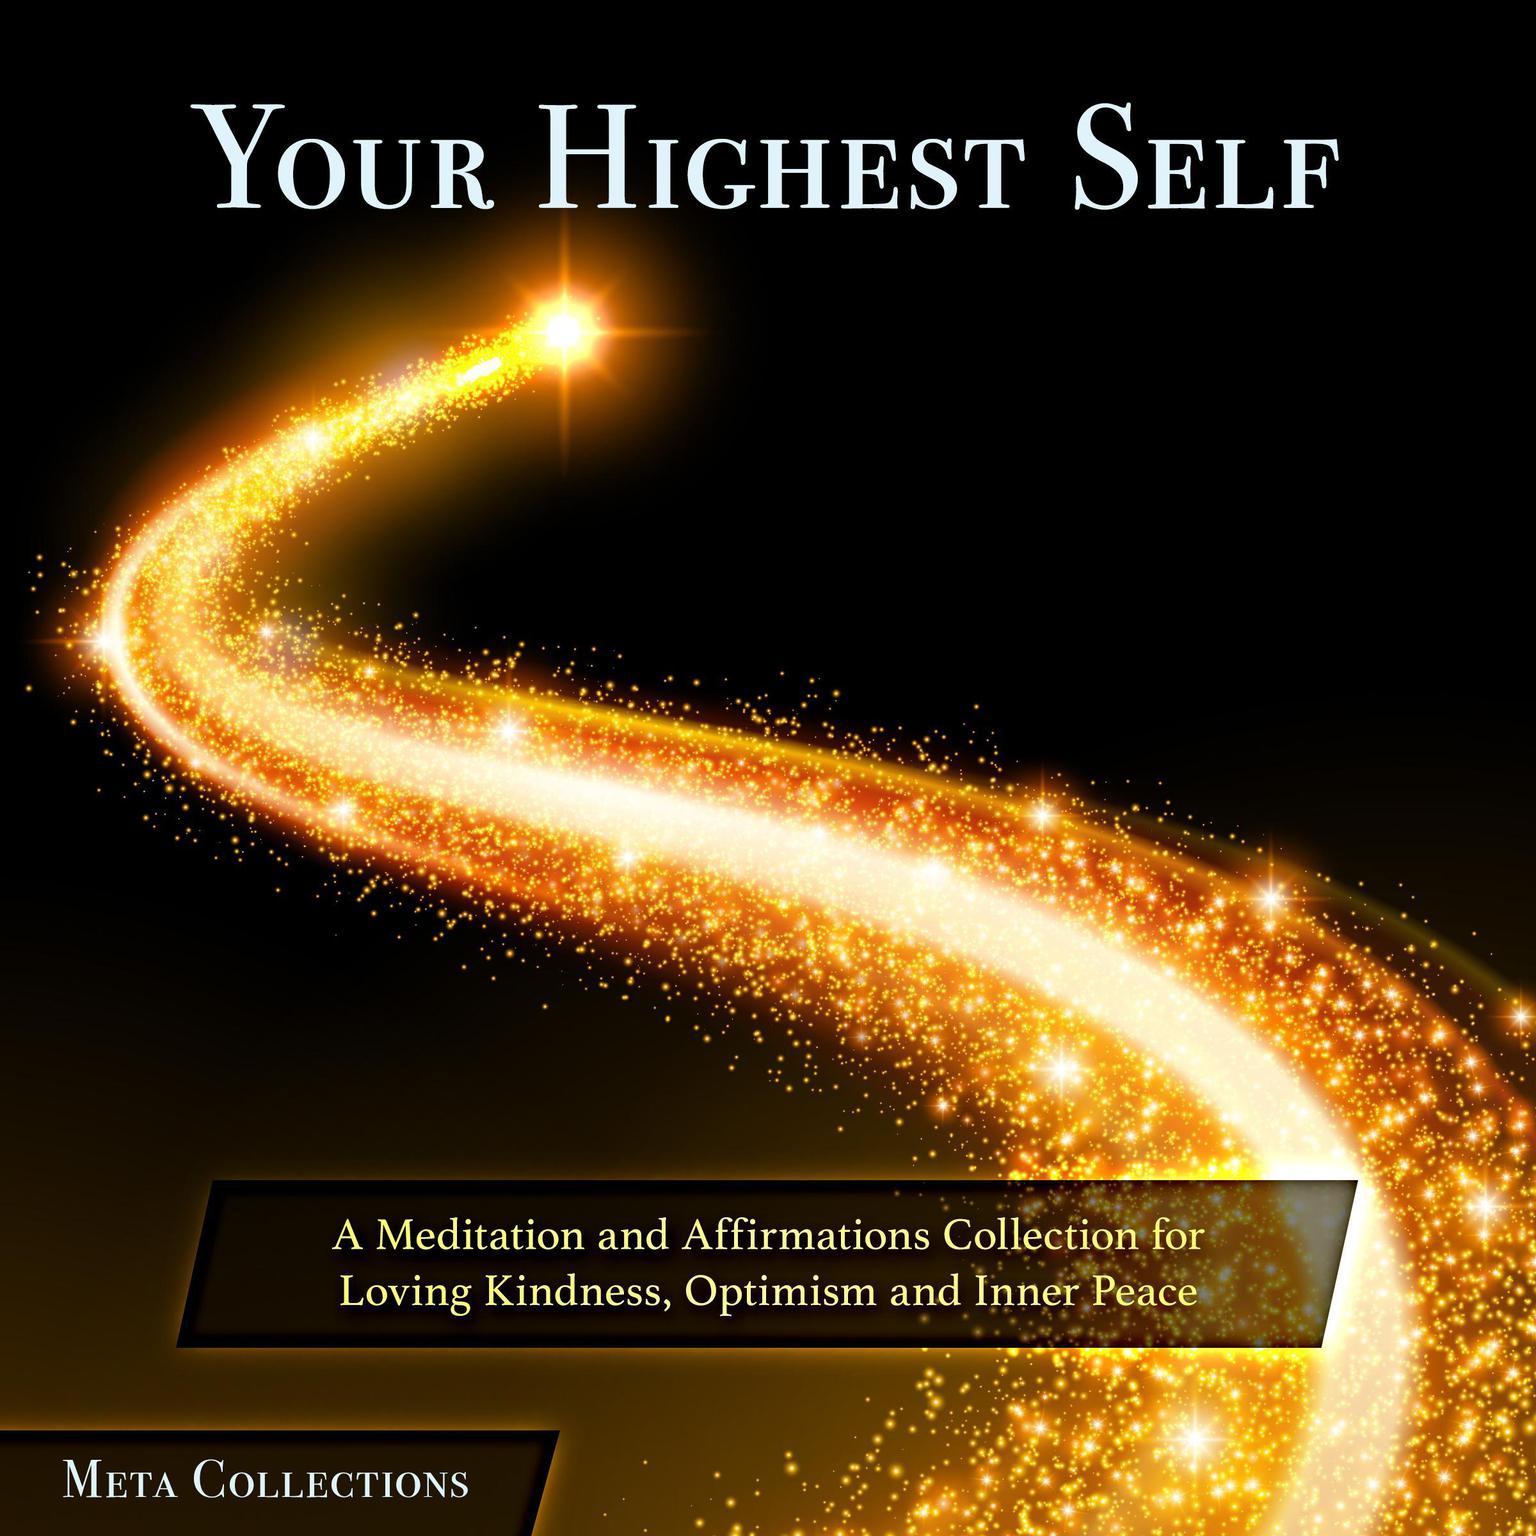 Your Highest Self: A Meditation and Affirmations Collection for Loving Kindness, Optimism and Inner Peace Audiobook, by Meta Collections